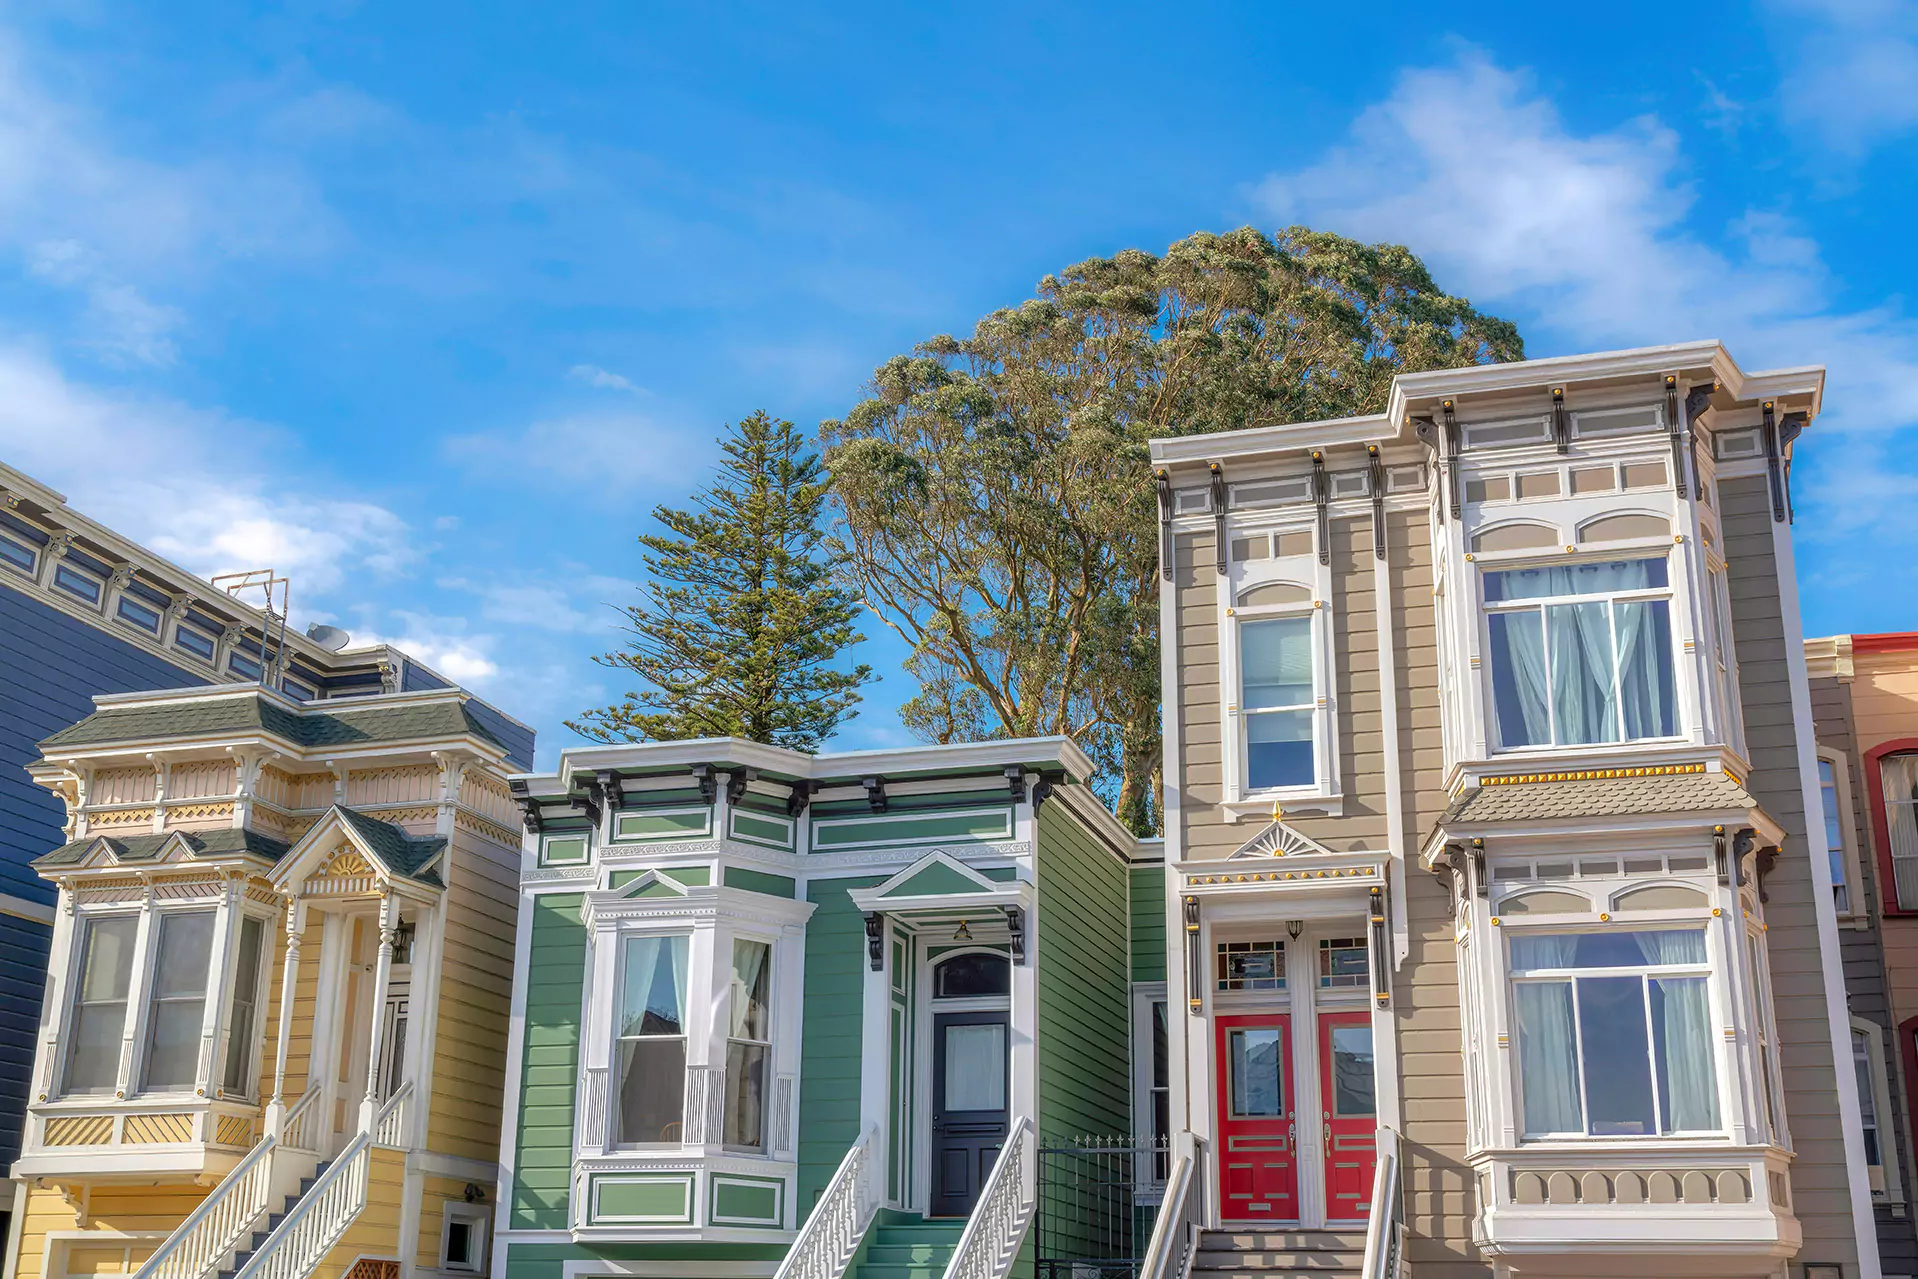 San Francisco street with colorful houses in a row with a nice tree and blue sky in the background